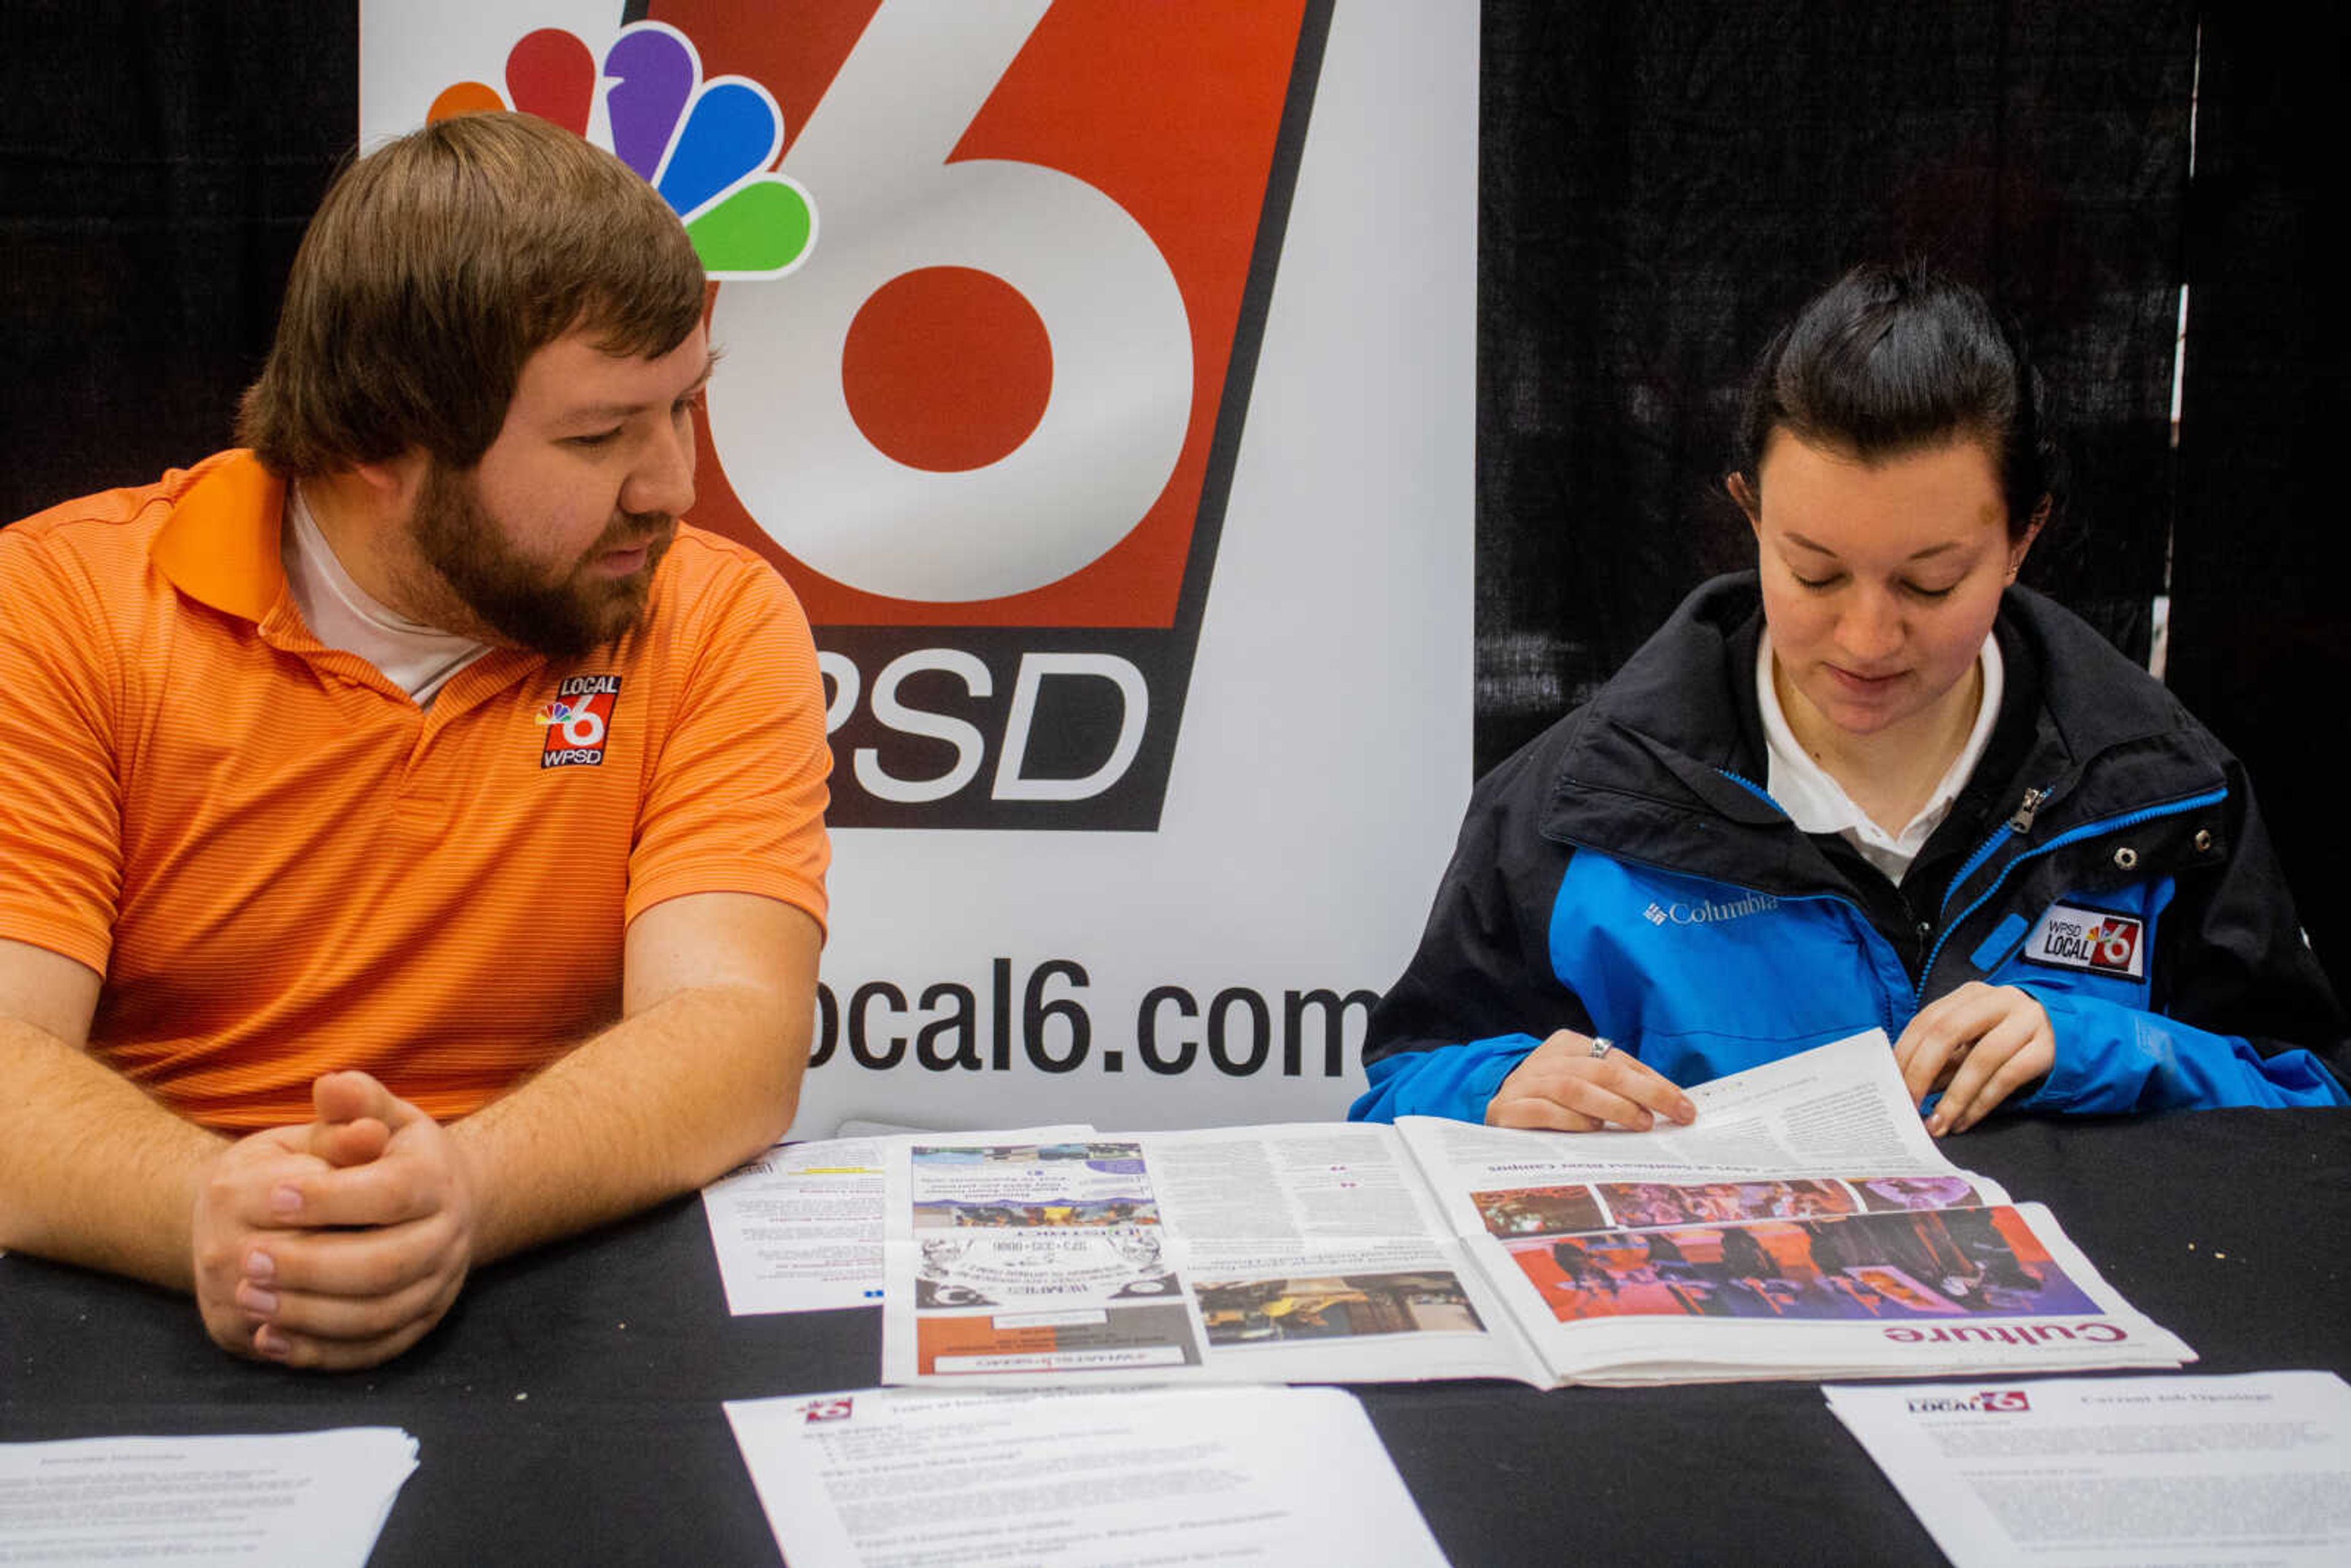 WPSD News Crew reading the latest version of the Southeast Arrow paper at the Career Expo, Thursday March 5th, 2020 at the Show Me Center in Cape Girardeau, Mo.